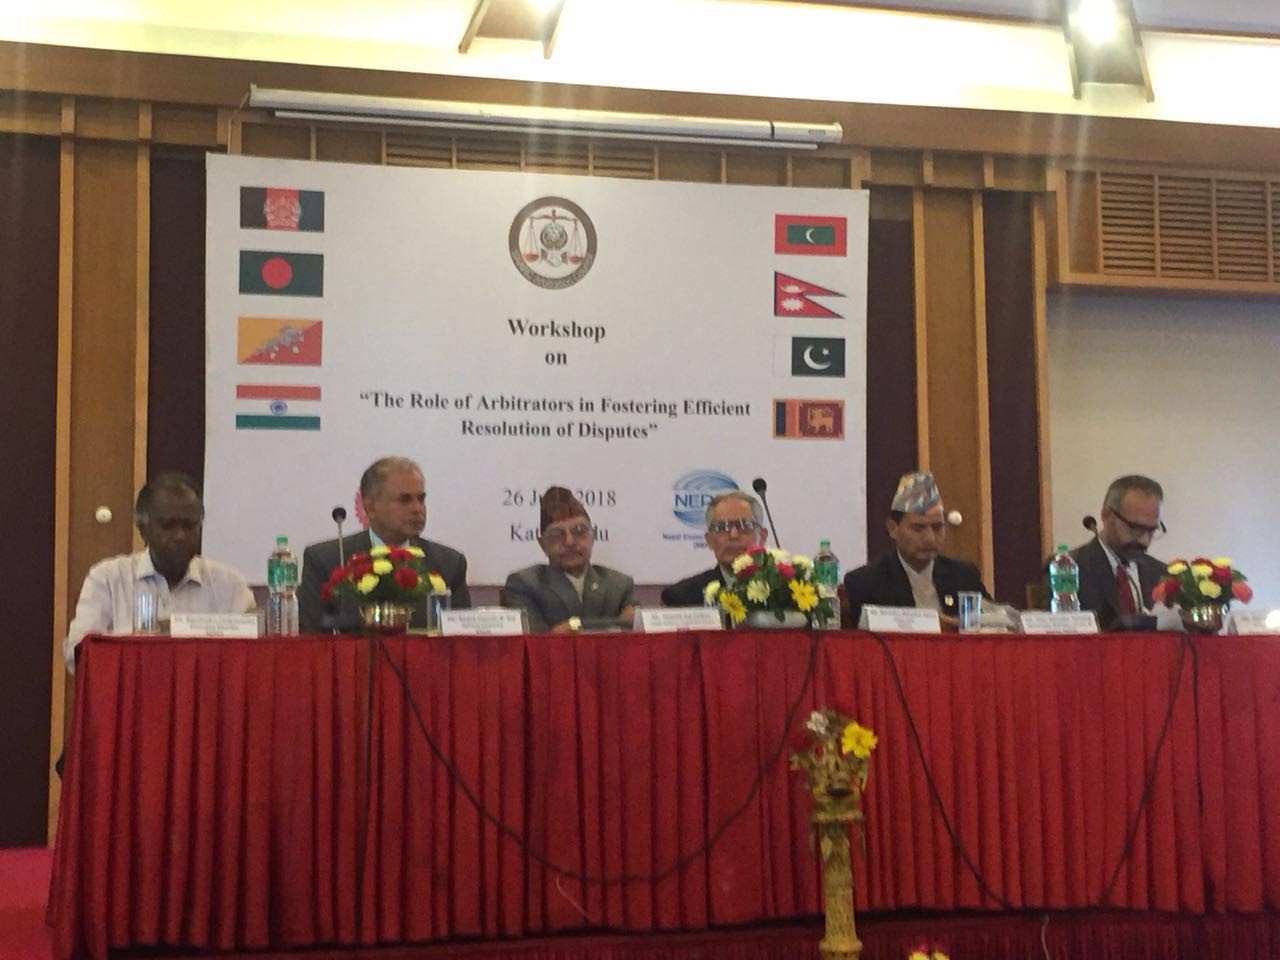 Press Release - Workshop on the Role of Arbitrators in Fostering Efficient Resolution of Disputes, organized jointly in Kathmandu today by SARCO